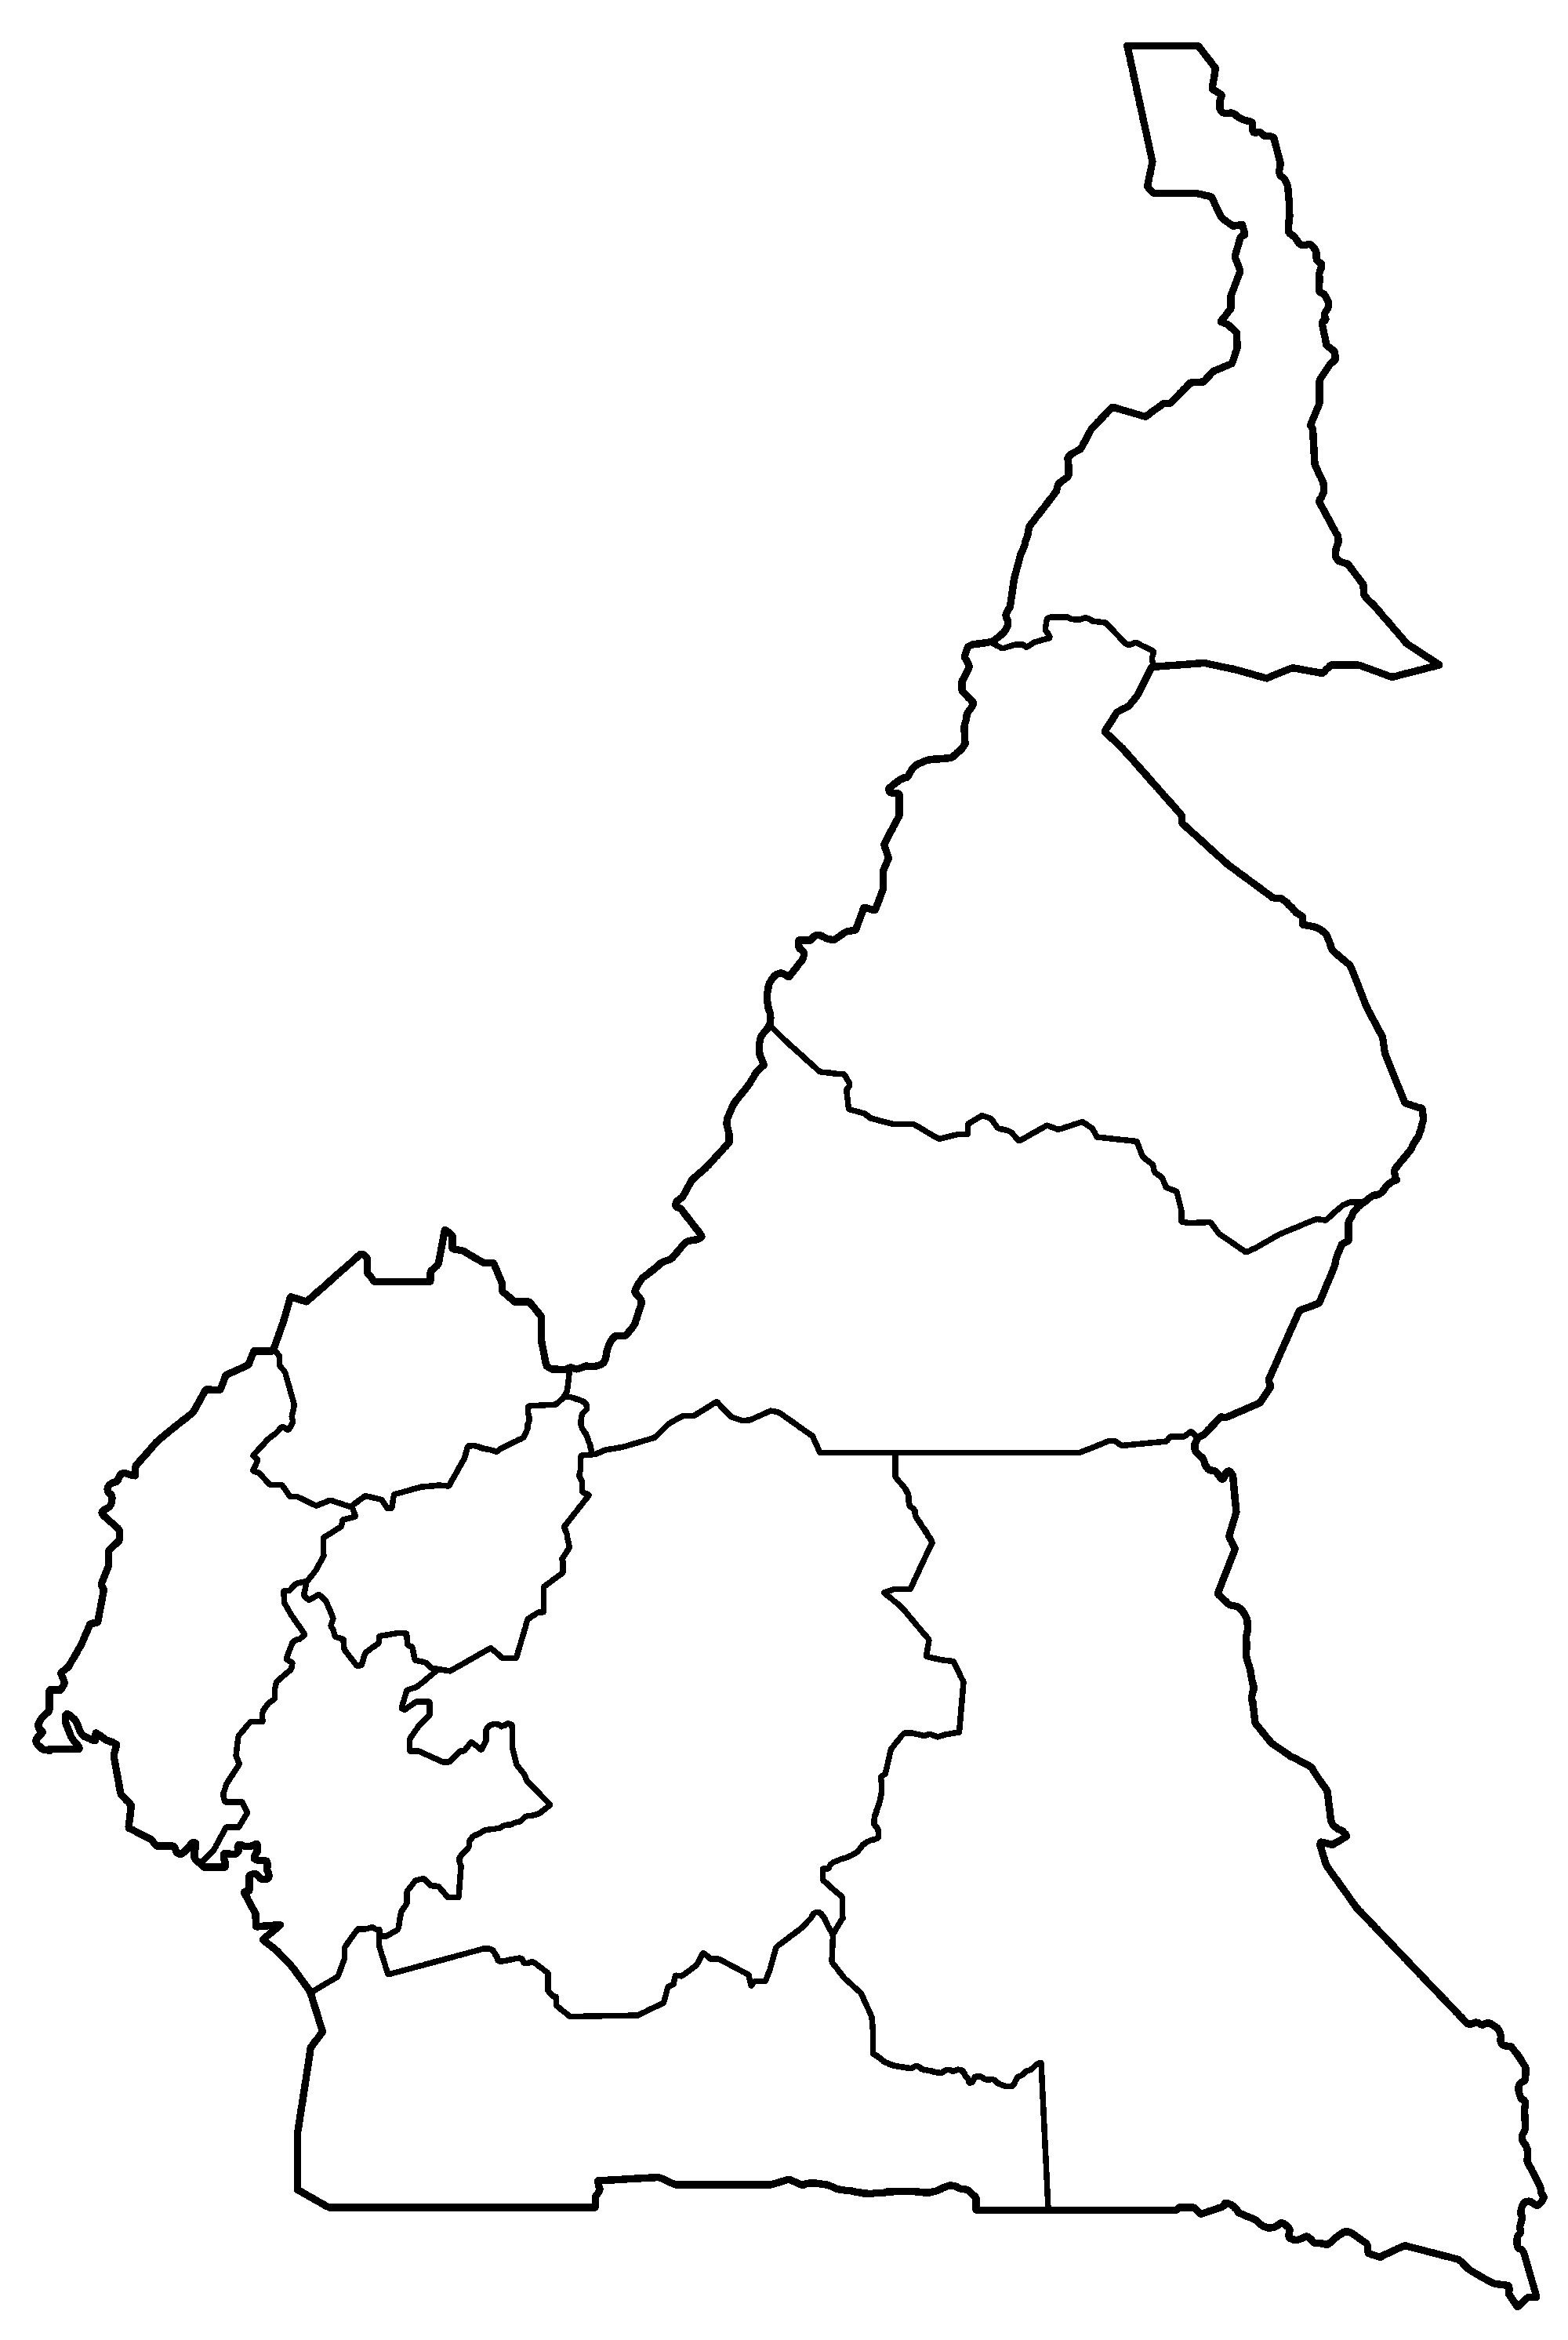 File:Cameroon sat.png